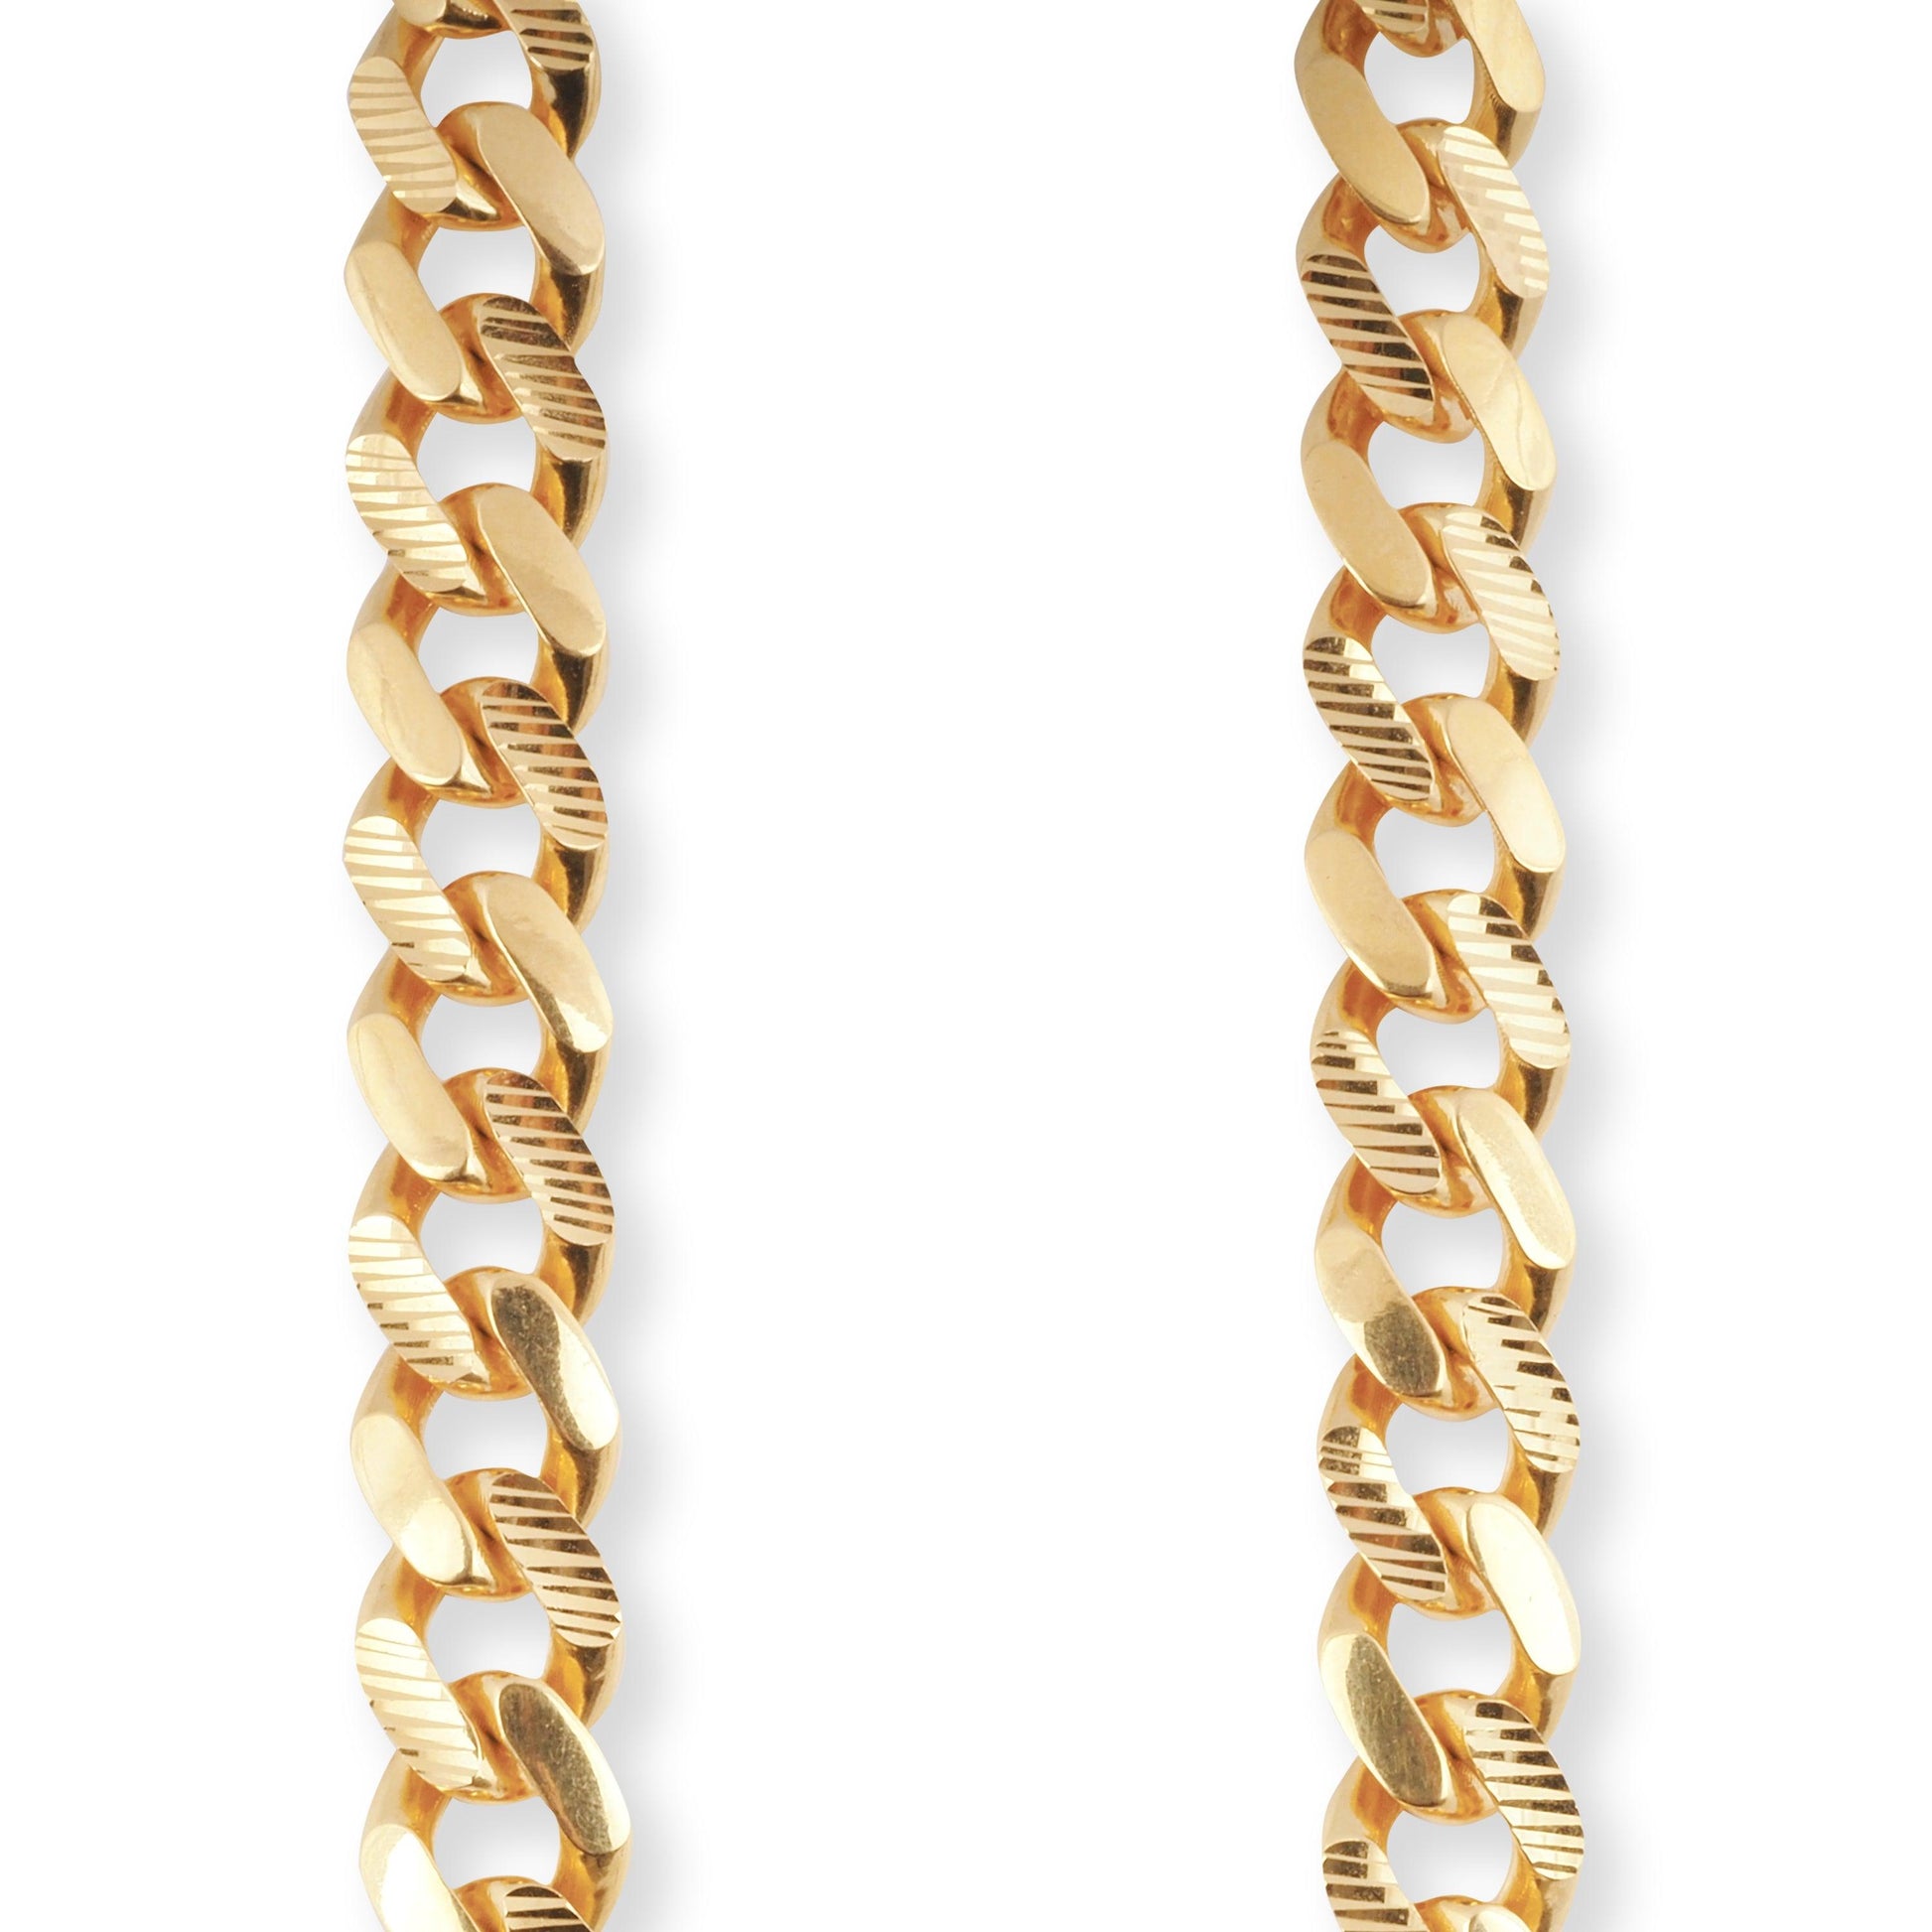 22ct Yellow Gold Curb Link Chain with Box Clasp N-7050 - Minar Jewellers